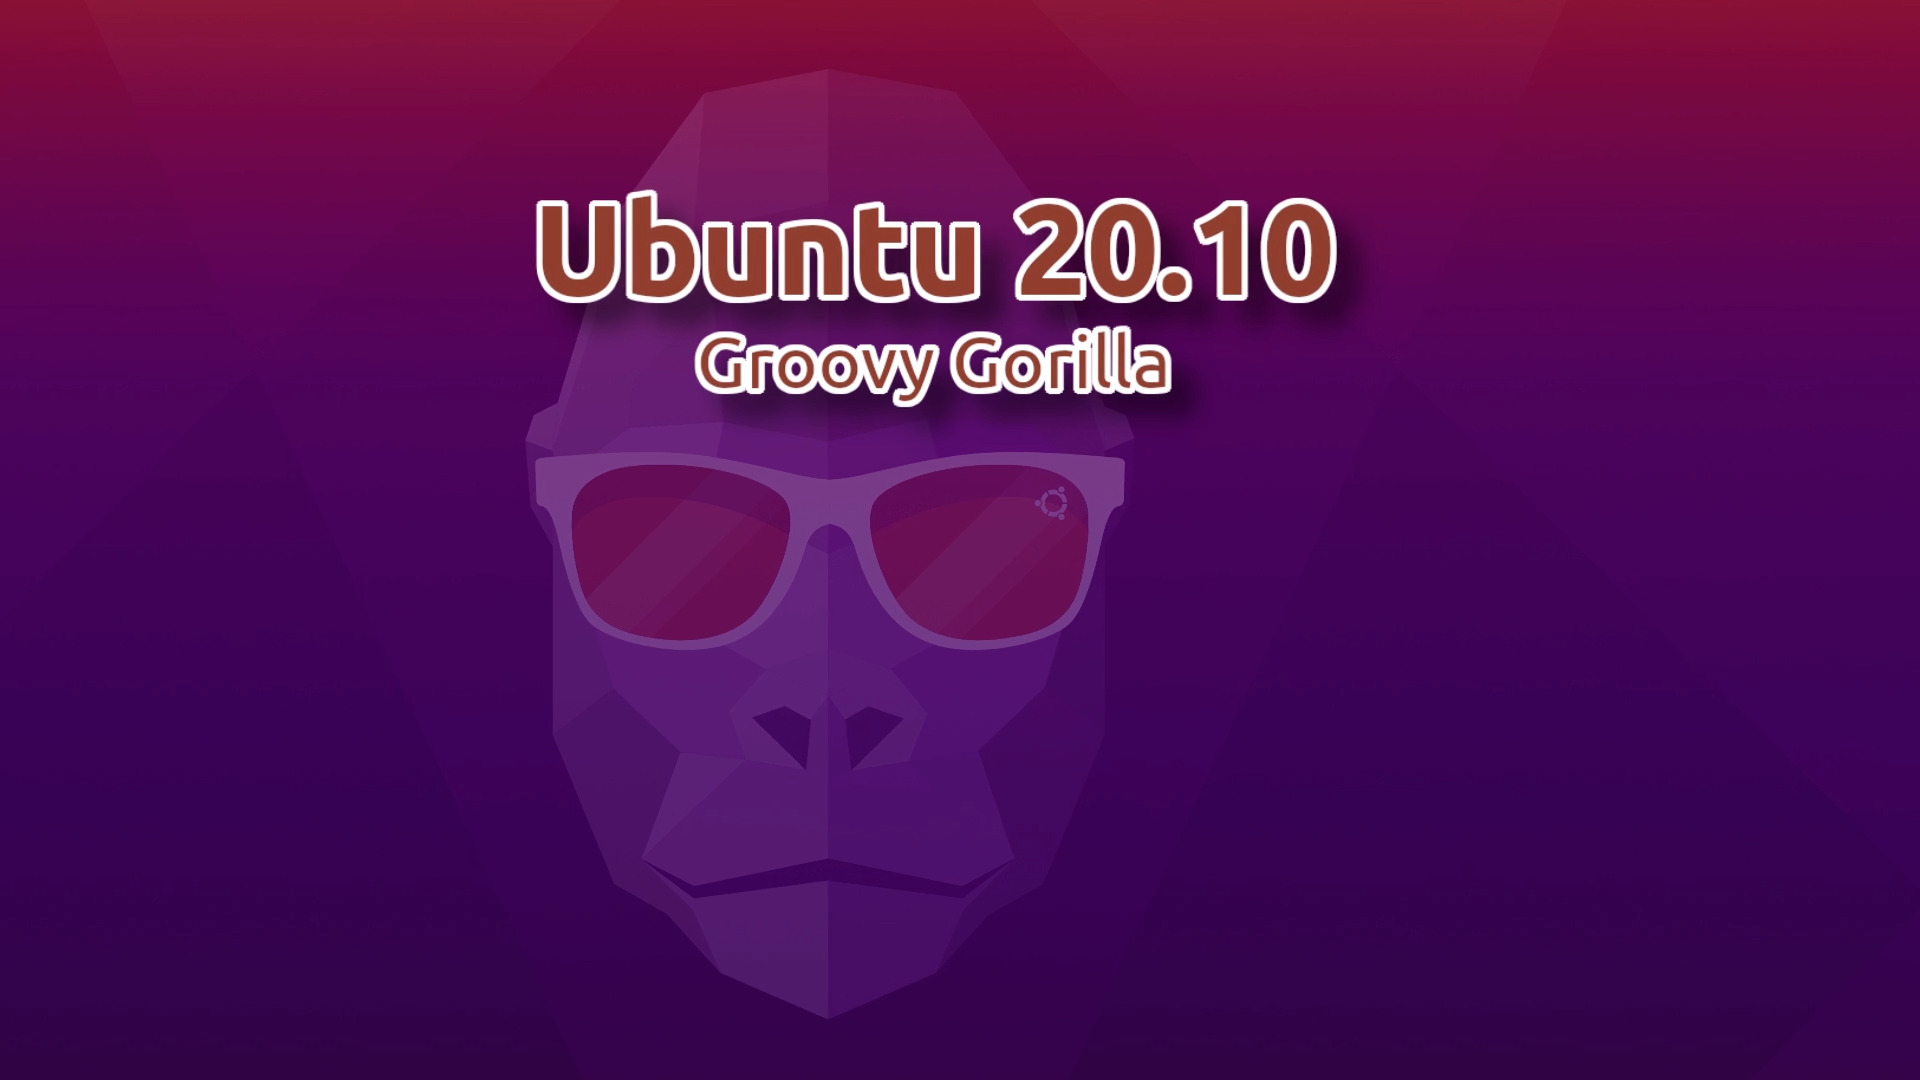 Ubuntu - Ubuntu 20.10 is due for release on October 22nd and with